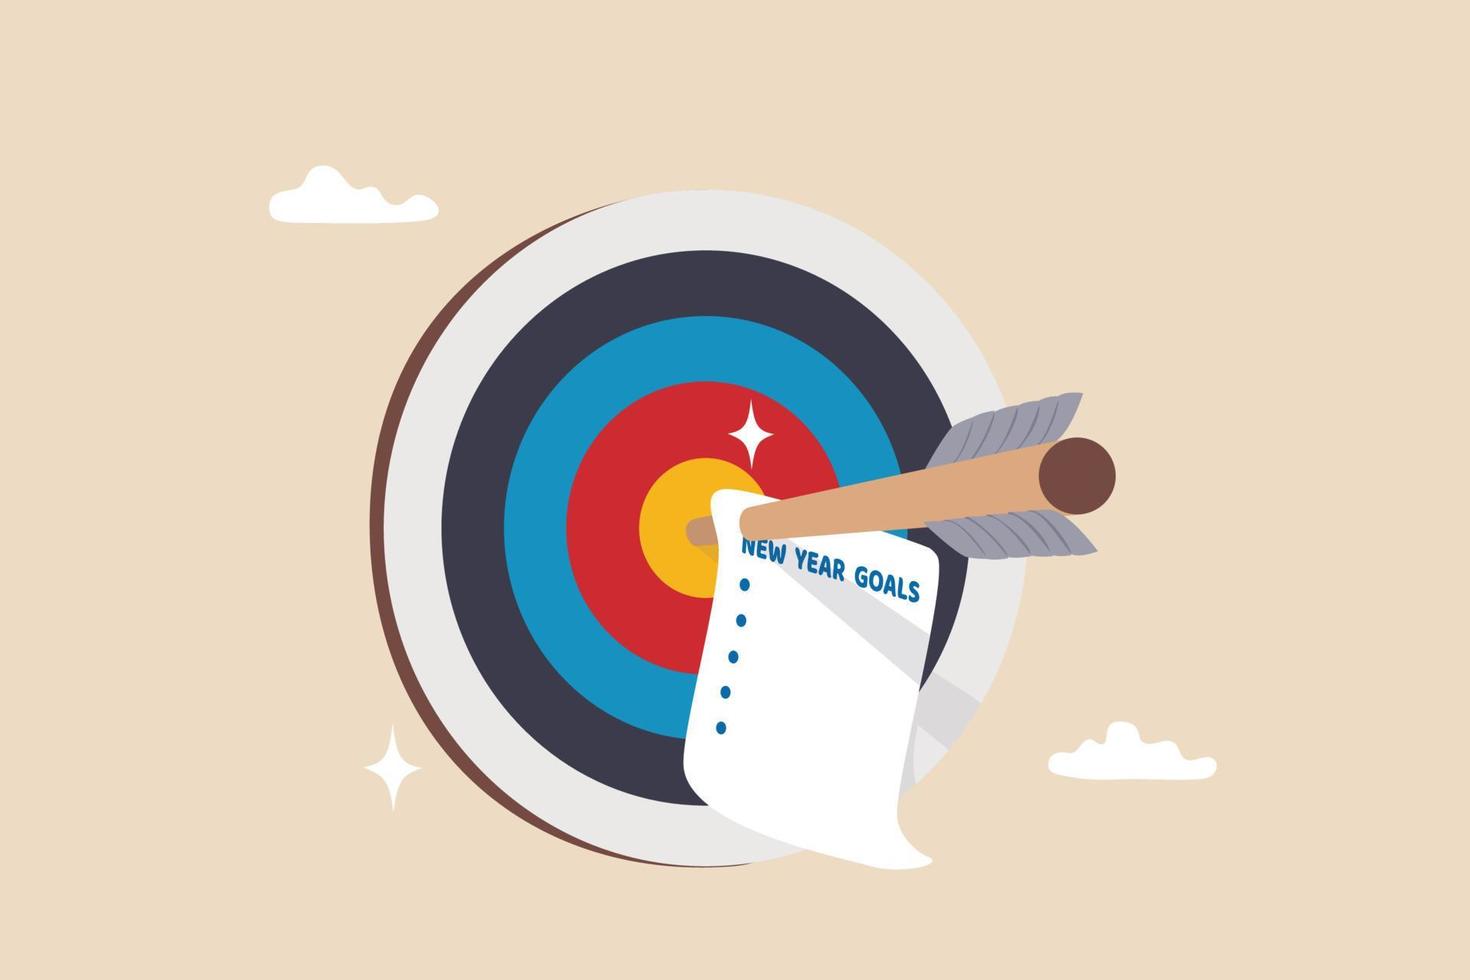 Set new year goals, target or resolution at the beginning of the year, determination or inspiration to improve and success concept, archer arrow with paper writing new year goals on bullseye target. vector